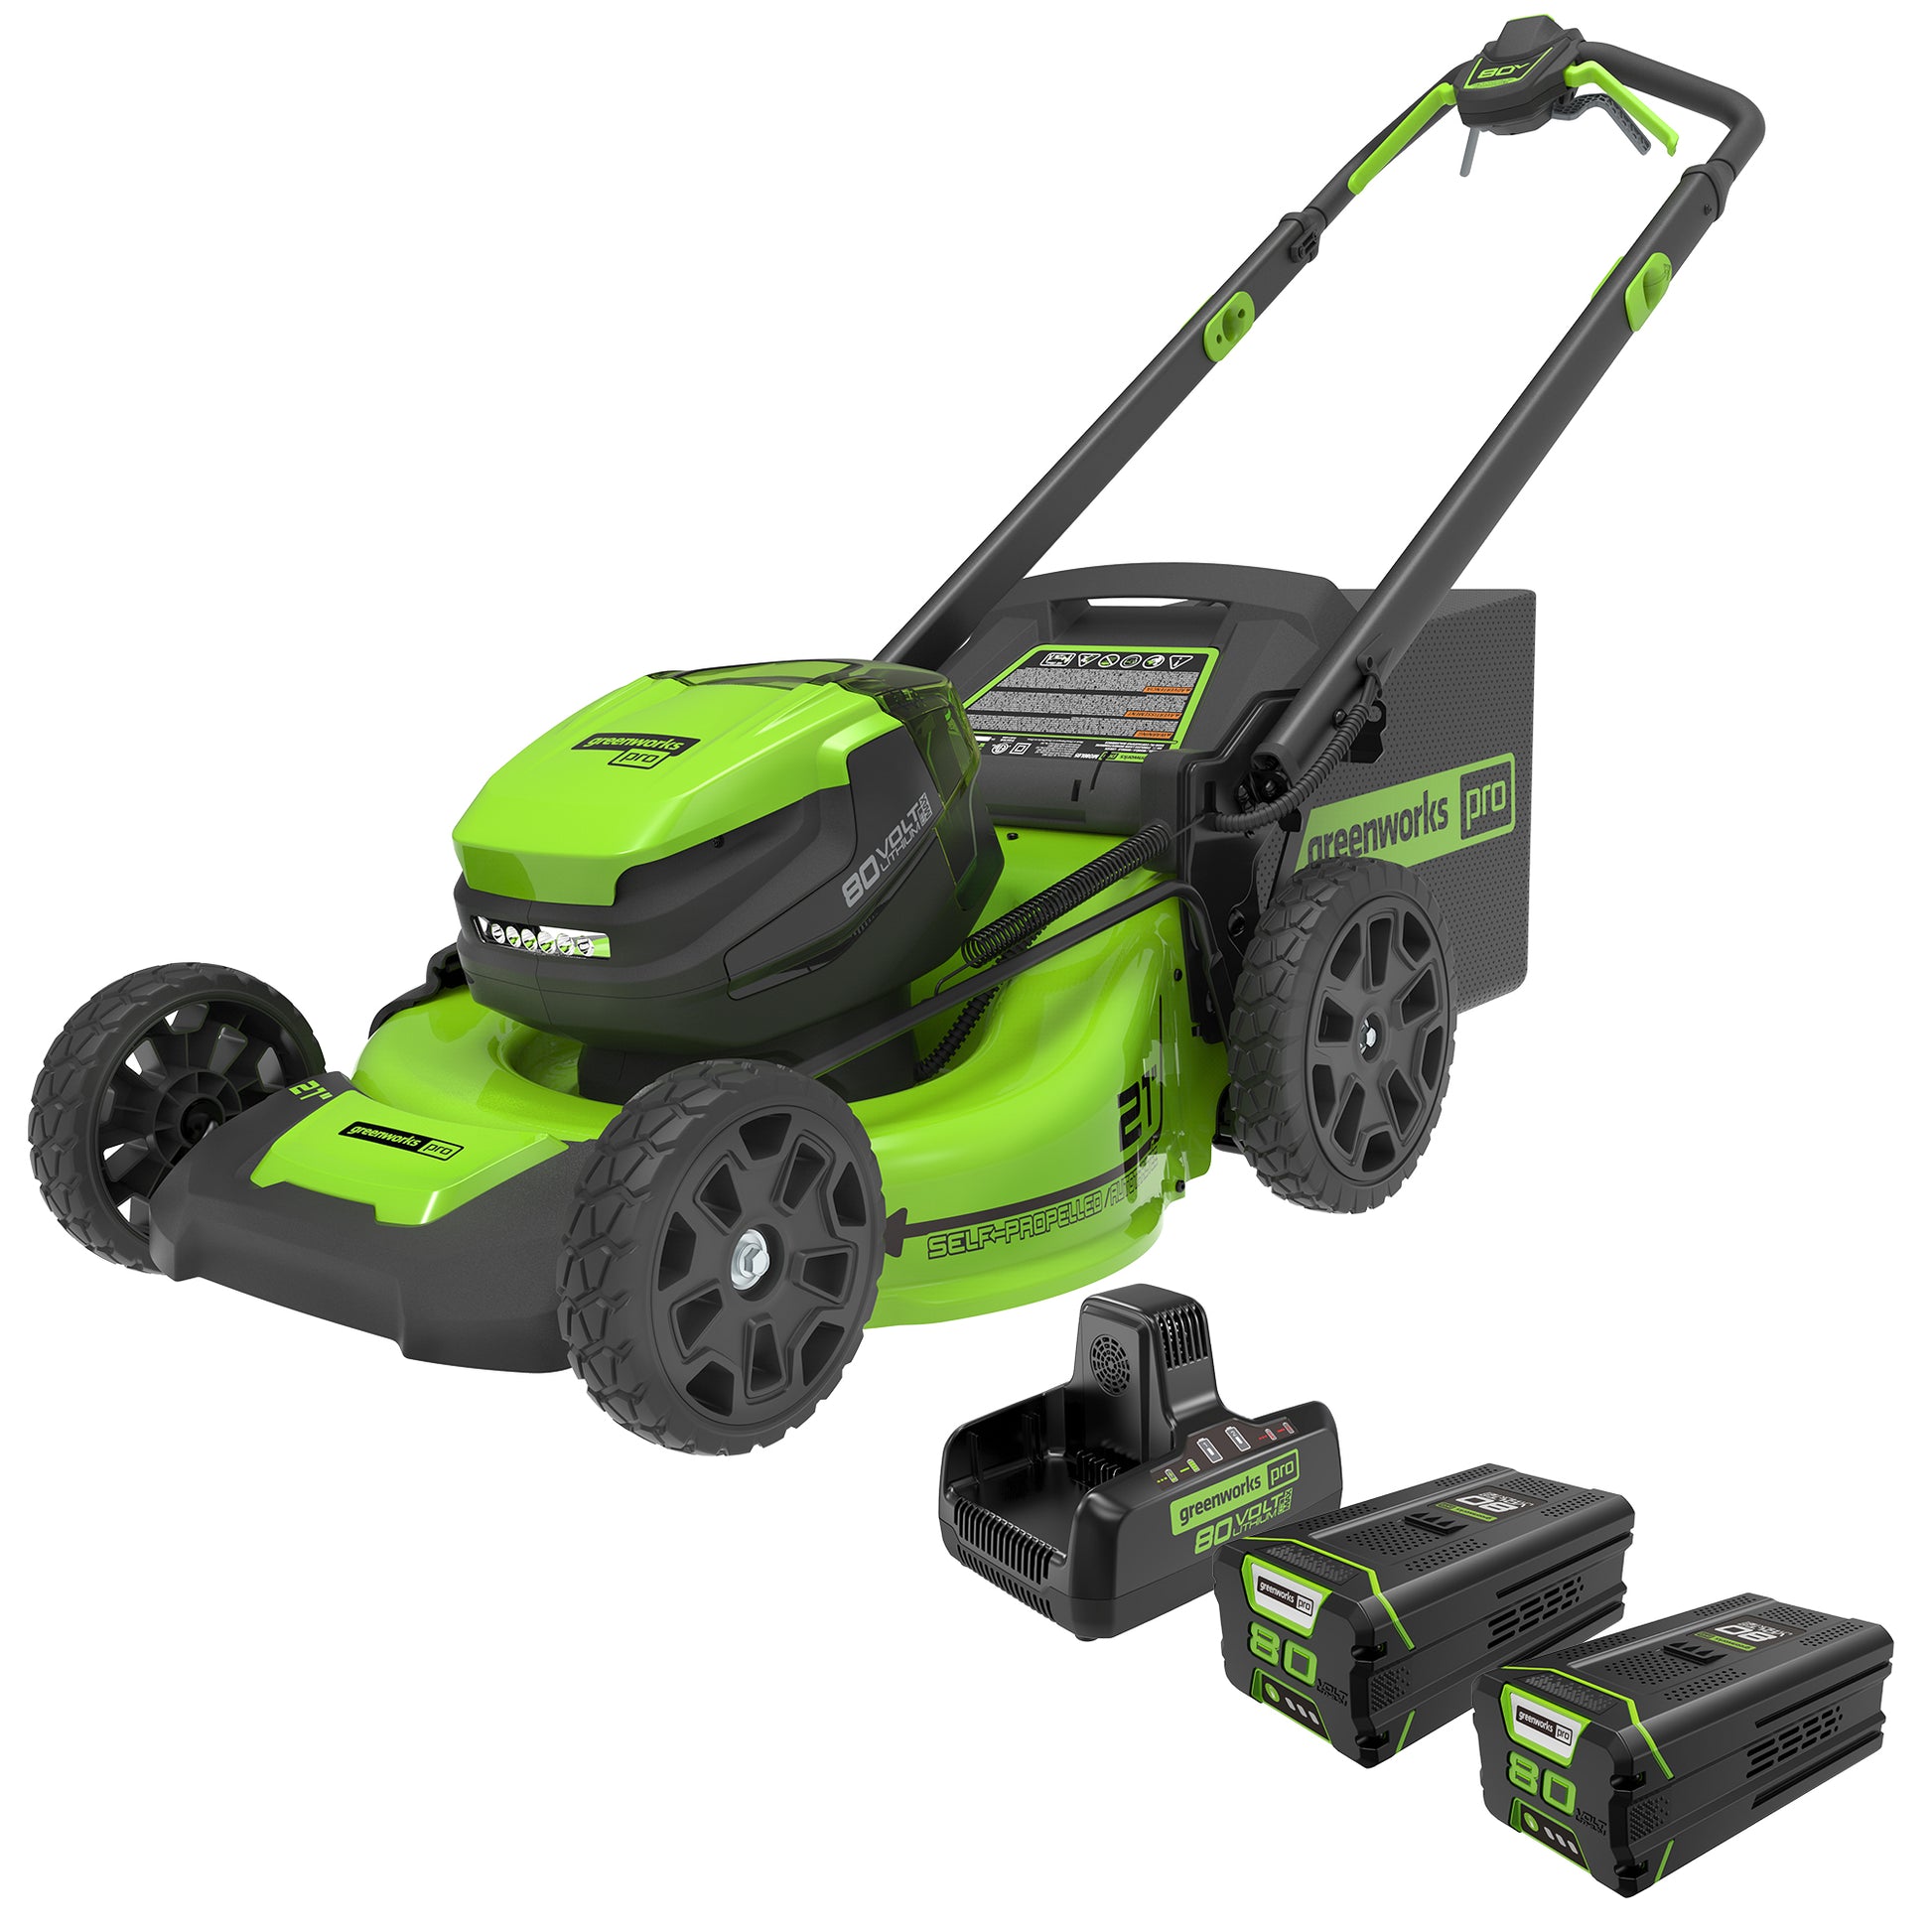 Greenworks - 80V 21 Cordless Self-Propelled Lawn Mower with (2) 4.0 Ah Batteries and Dual-Port Charger - Green